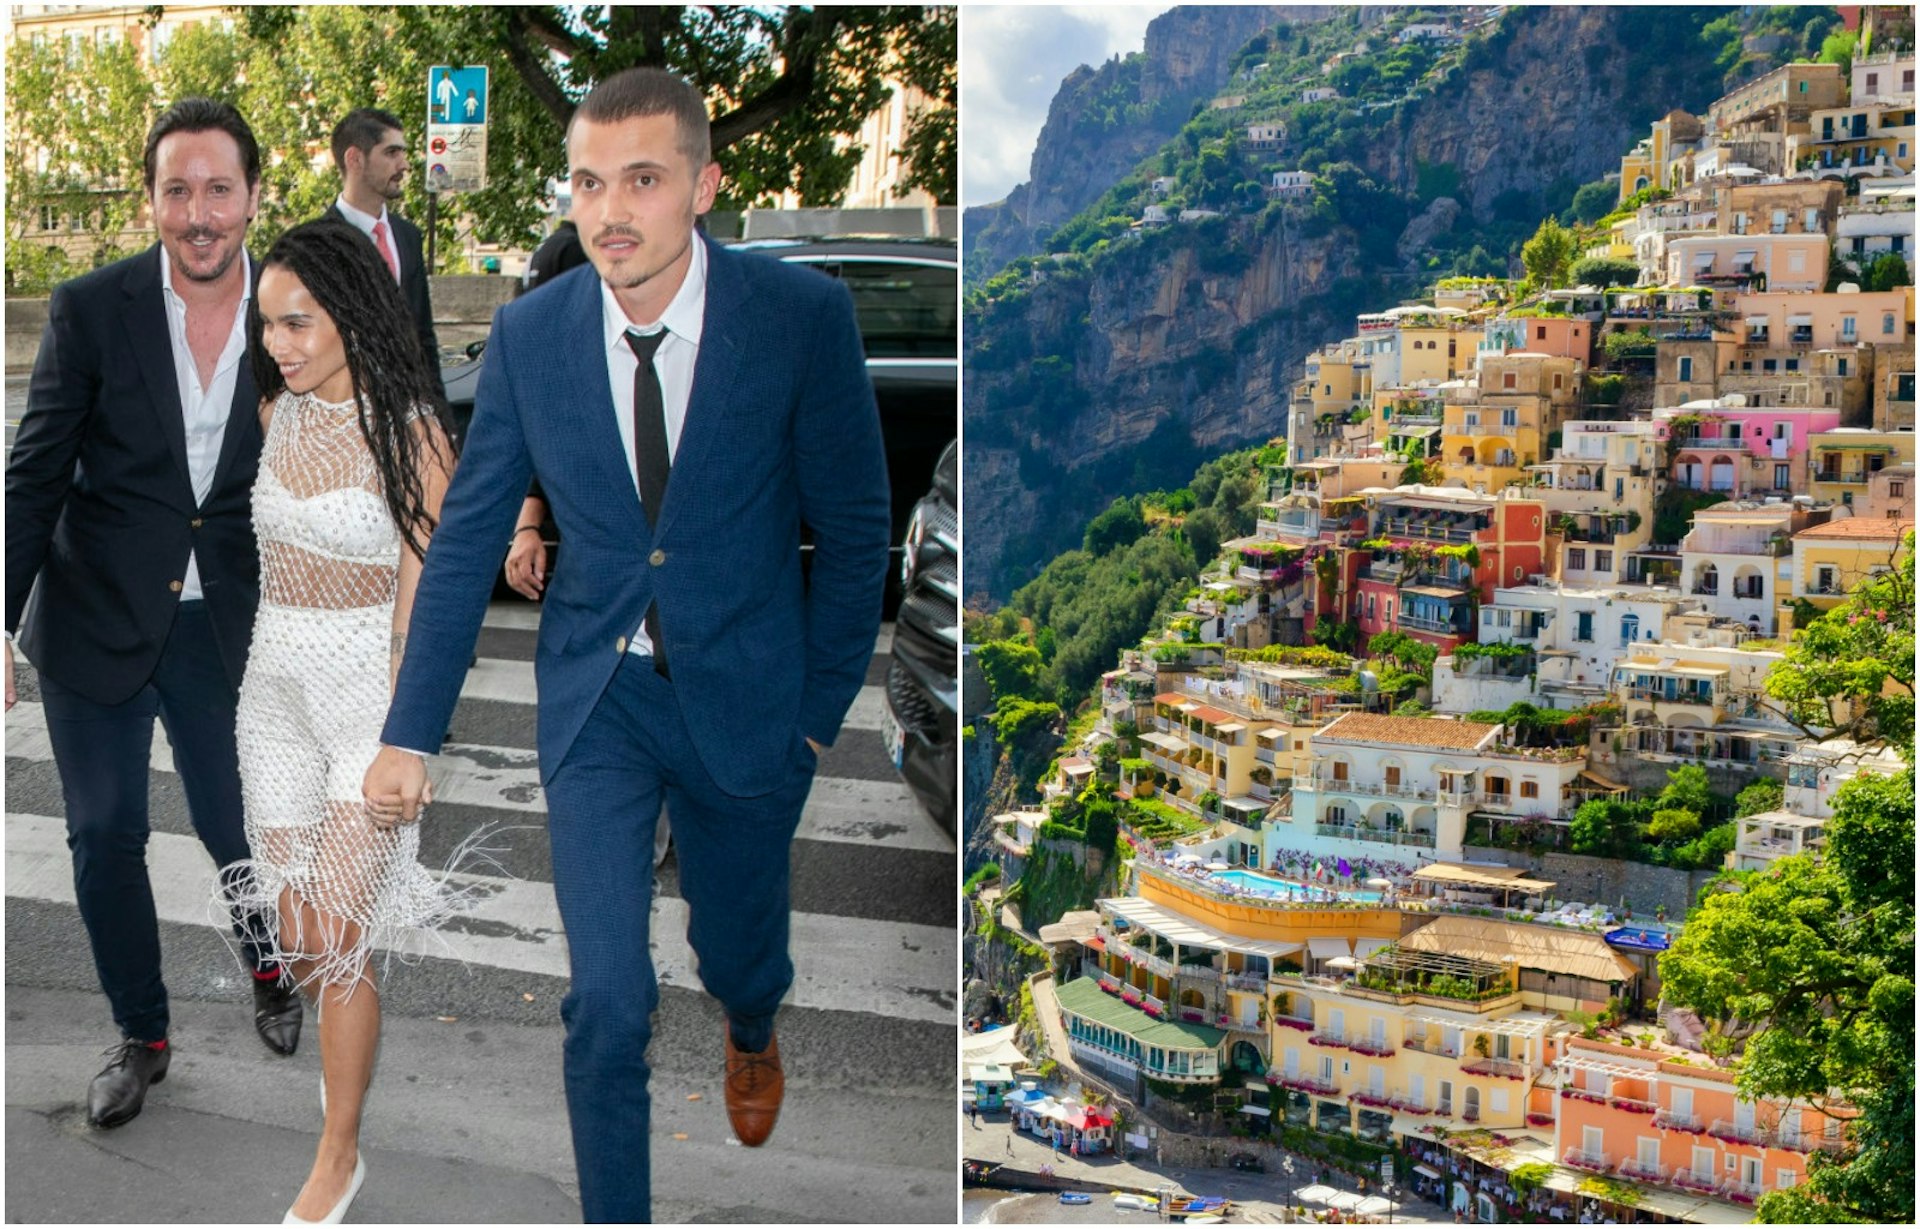 The picture on the left shows Zoe Kravitz and Karl Glusman walking hand in hand down a set of stone steps. The image on the right is of multi-coloured houses built into the side of a cliff in Positano.